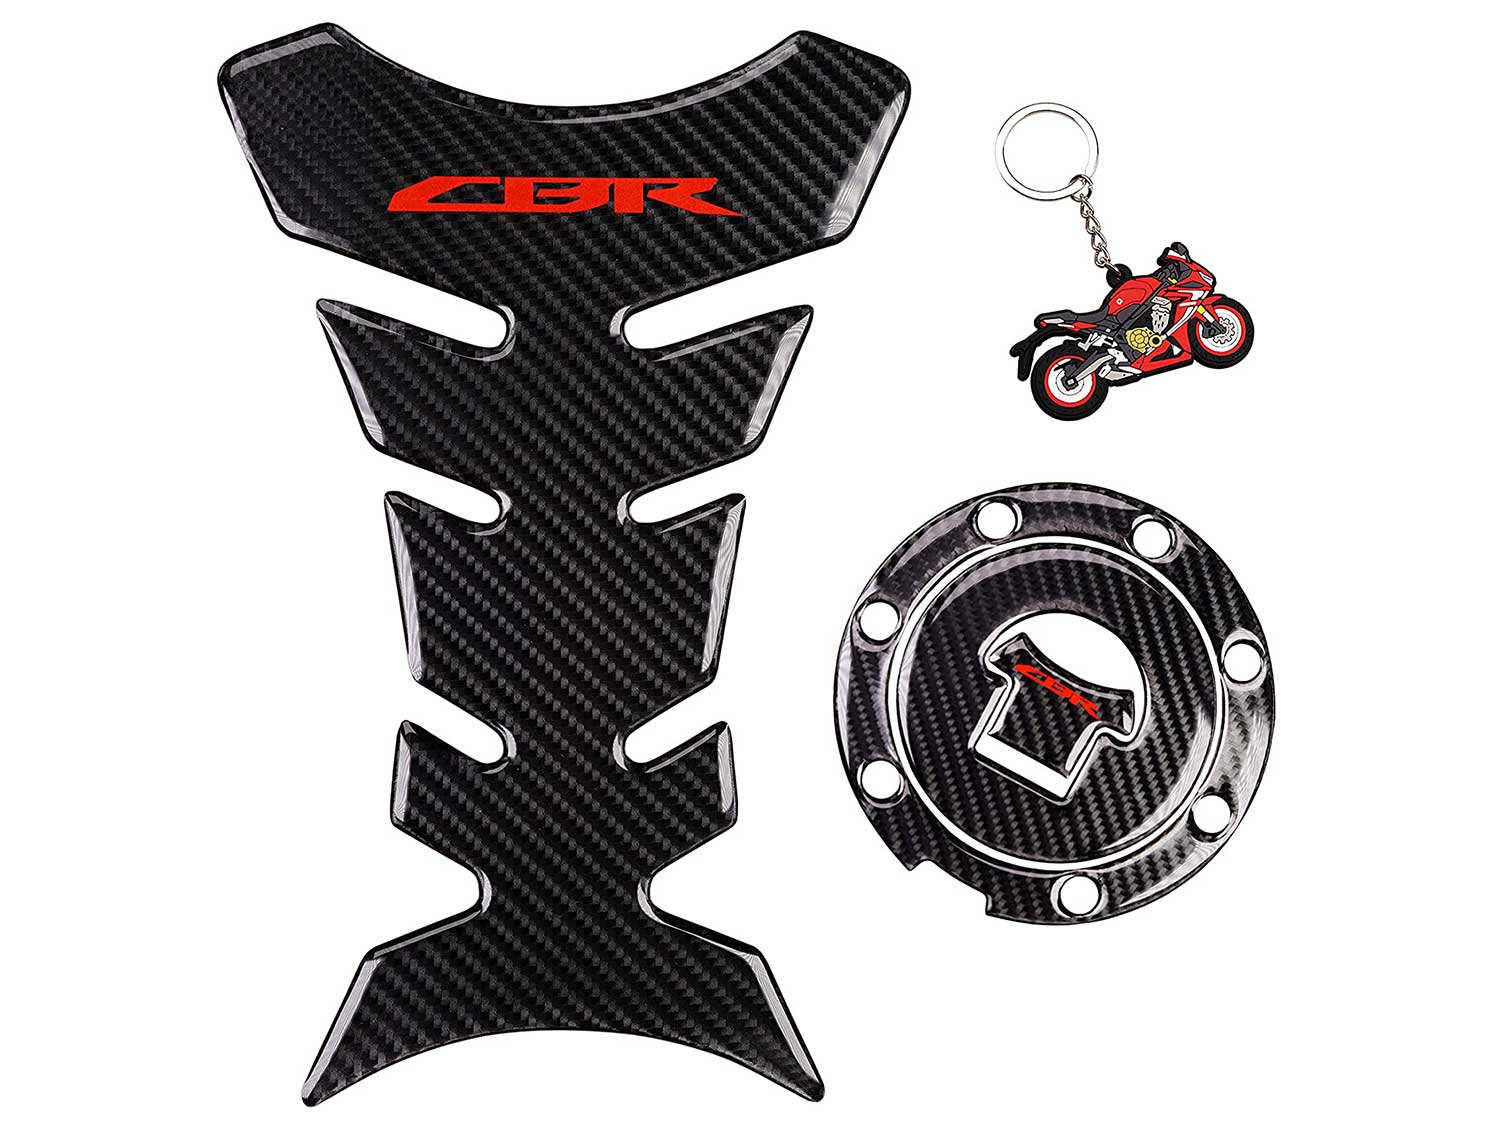 REVSOSTAR Real Carbon Look, Fuel Gas Tank Cap, Protector Pad, Tank Pad Decal Stickers, Tank Protector with Keychain for CBR600RR 2003-2015 CBR1000RR 2004-2015, 3PCS Per Set (RED)